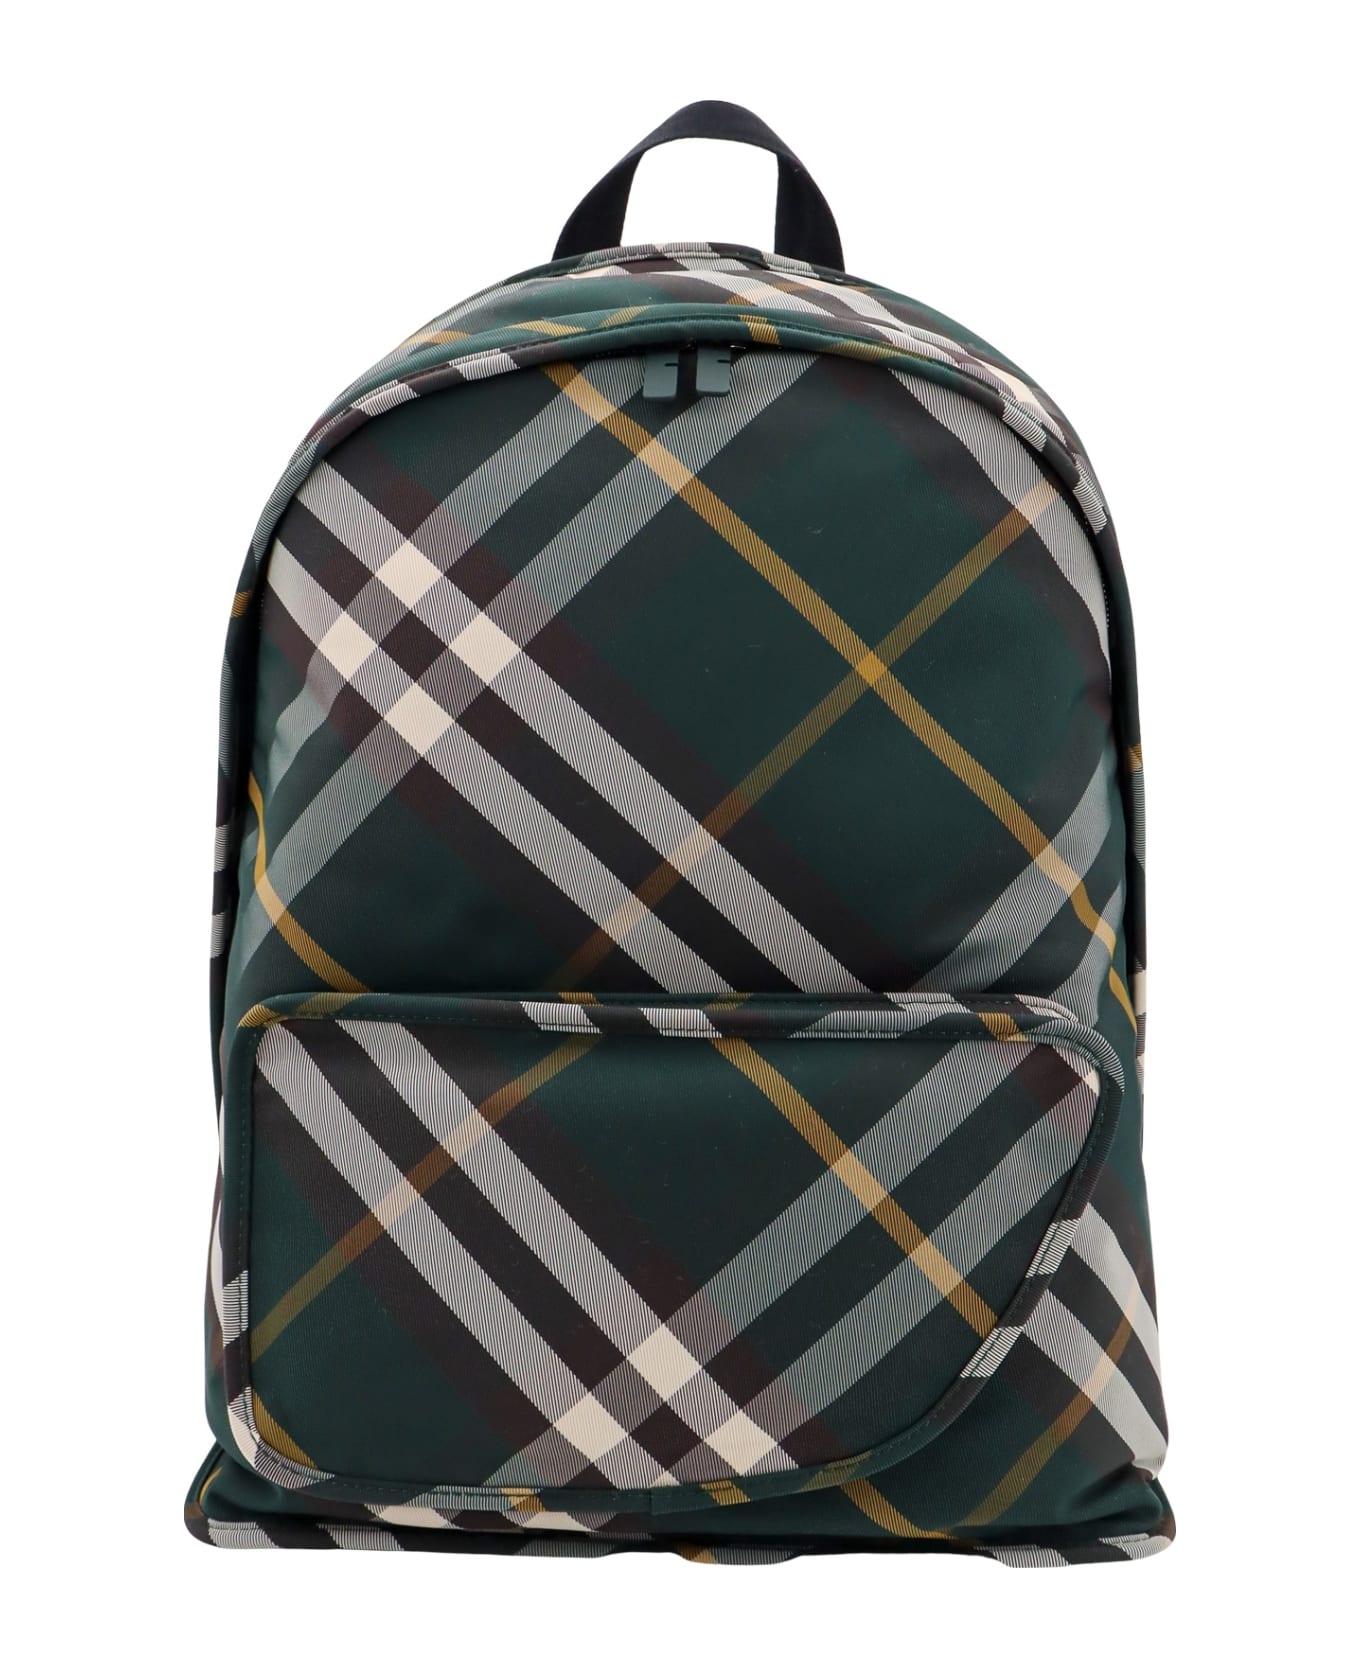 Burberry Backpack - Ivy バックパック